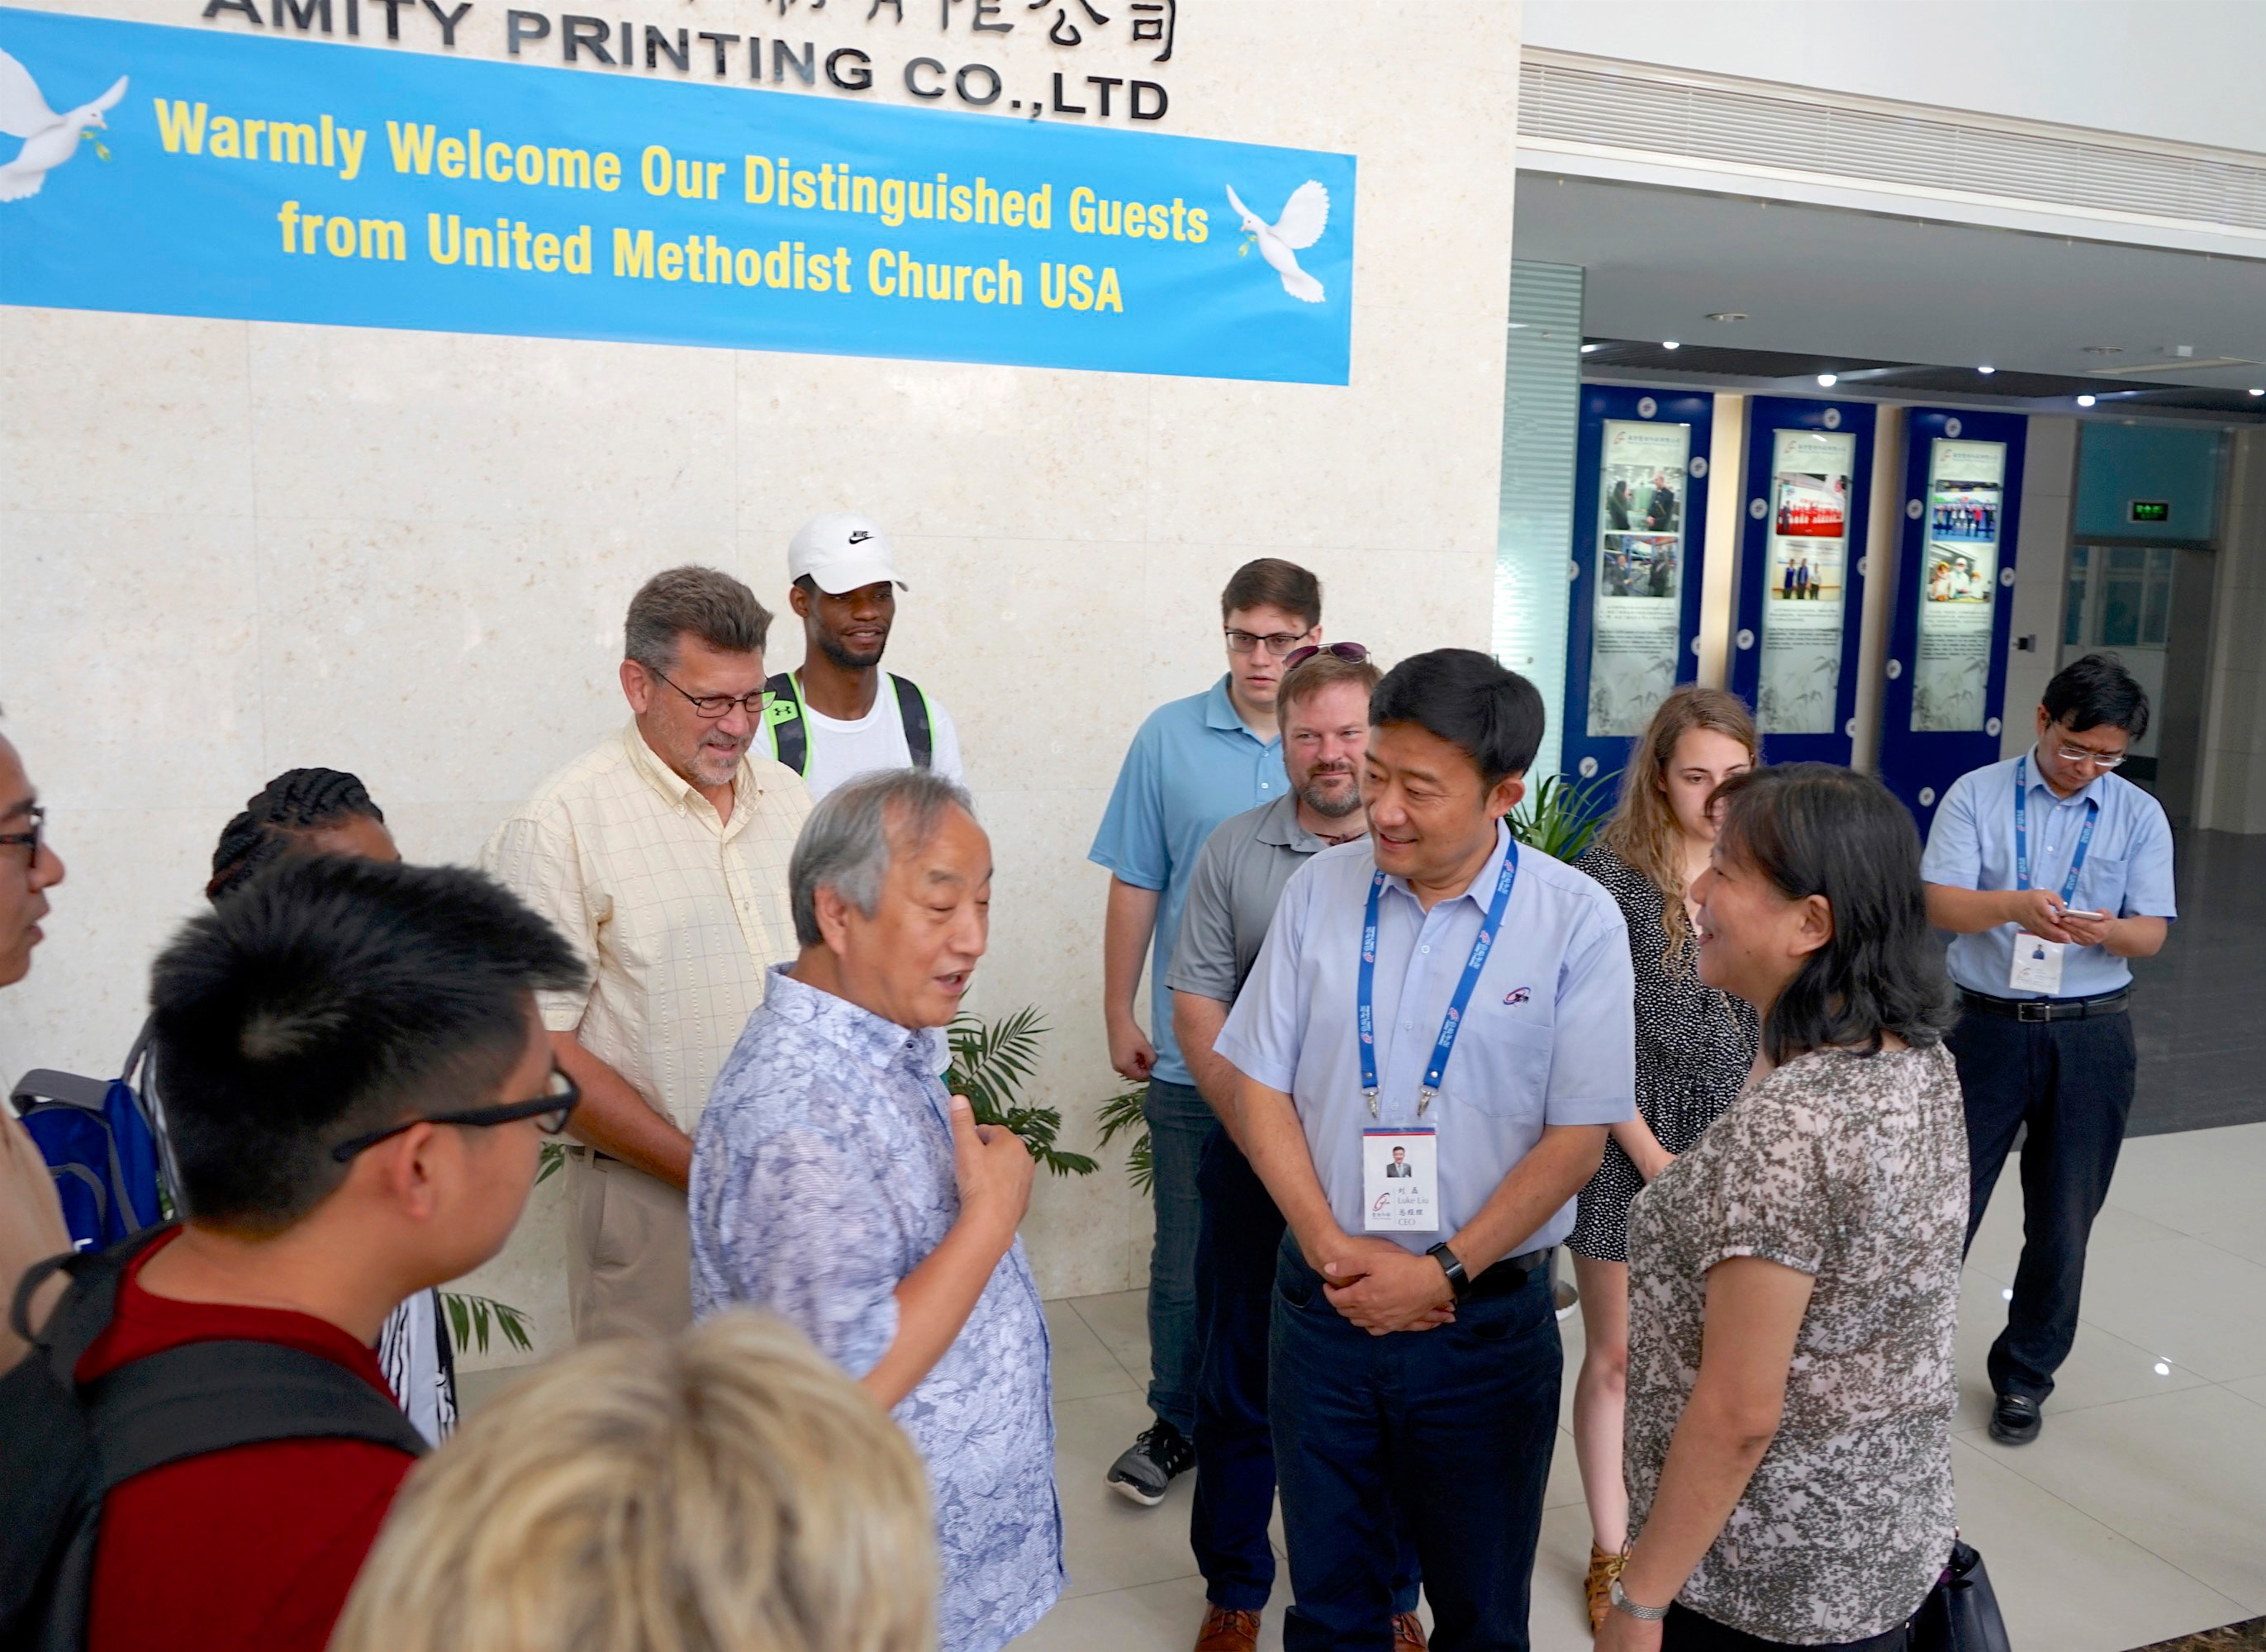 Wisconsin Area Bishop Hee-Soo Jung, center left, talks with officials from the Amity Printing Press in Nanjing, China, during a visit by a joint United Methodist Volunteers in Mission team from the denomination’s North Central and Northeastern Jurisdictions. In November, Amity will print its 200 millionth Bible and Jung is among the Christian leaders invited to come and mark the occasion. Photo courtesy of the Rev. David Newhouse.